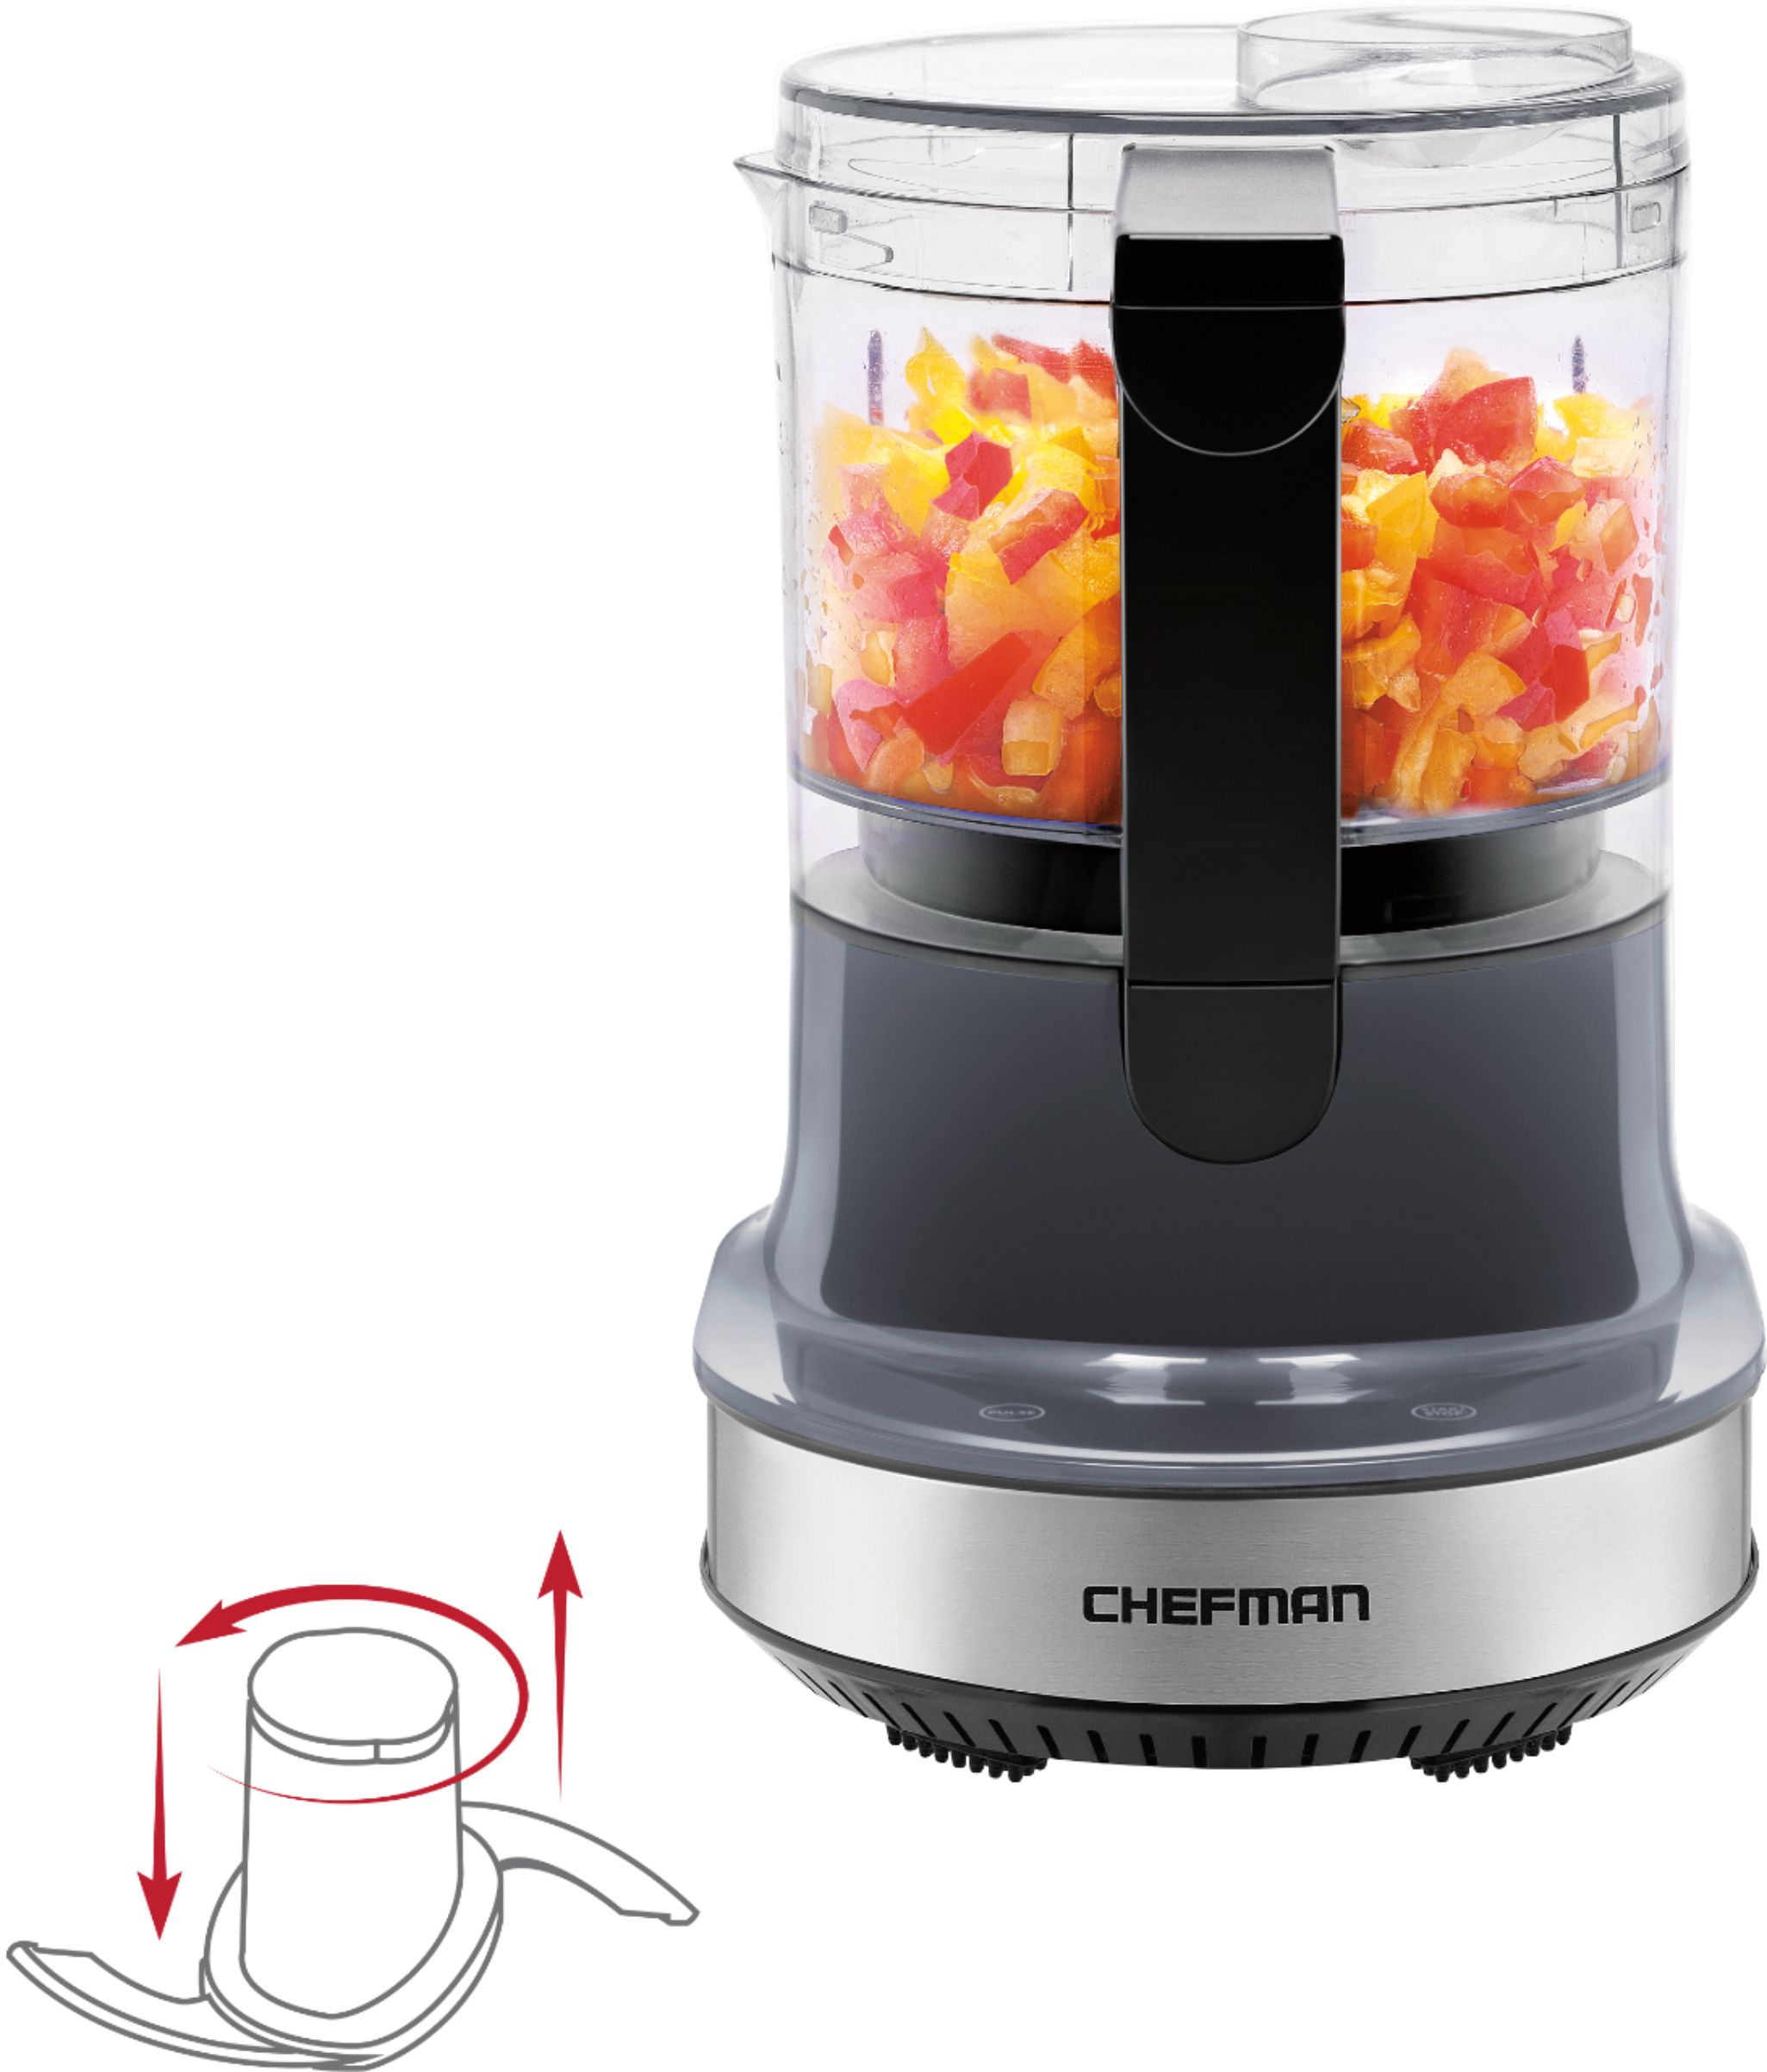 candidate Weakness fax Best Buy: Chefman 4-Cup Electric Food Chopper Black RJ13-4-AFC-BLACK